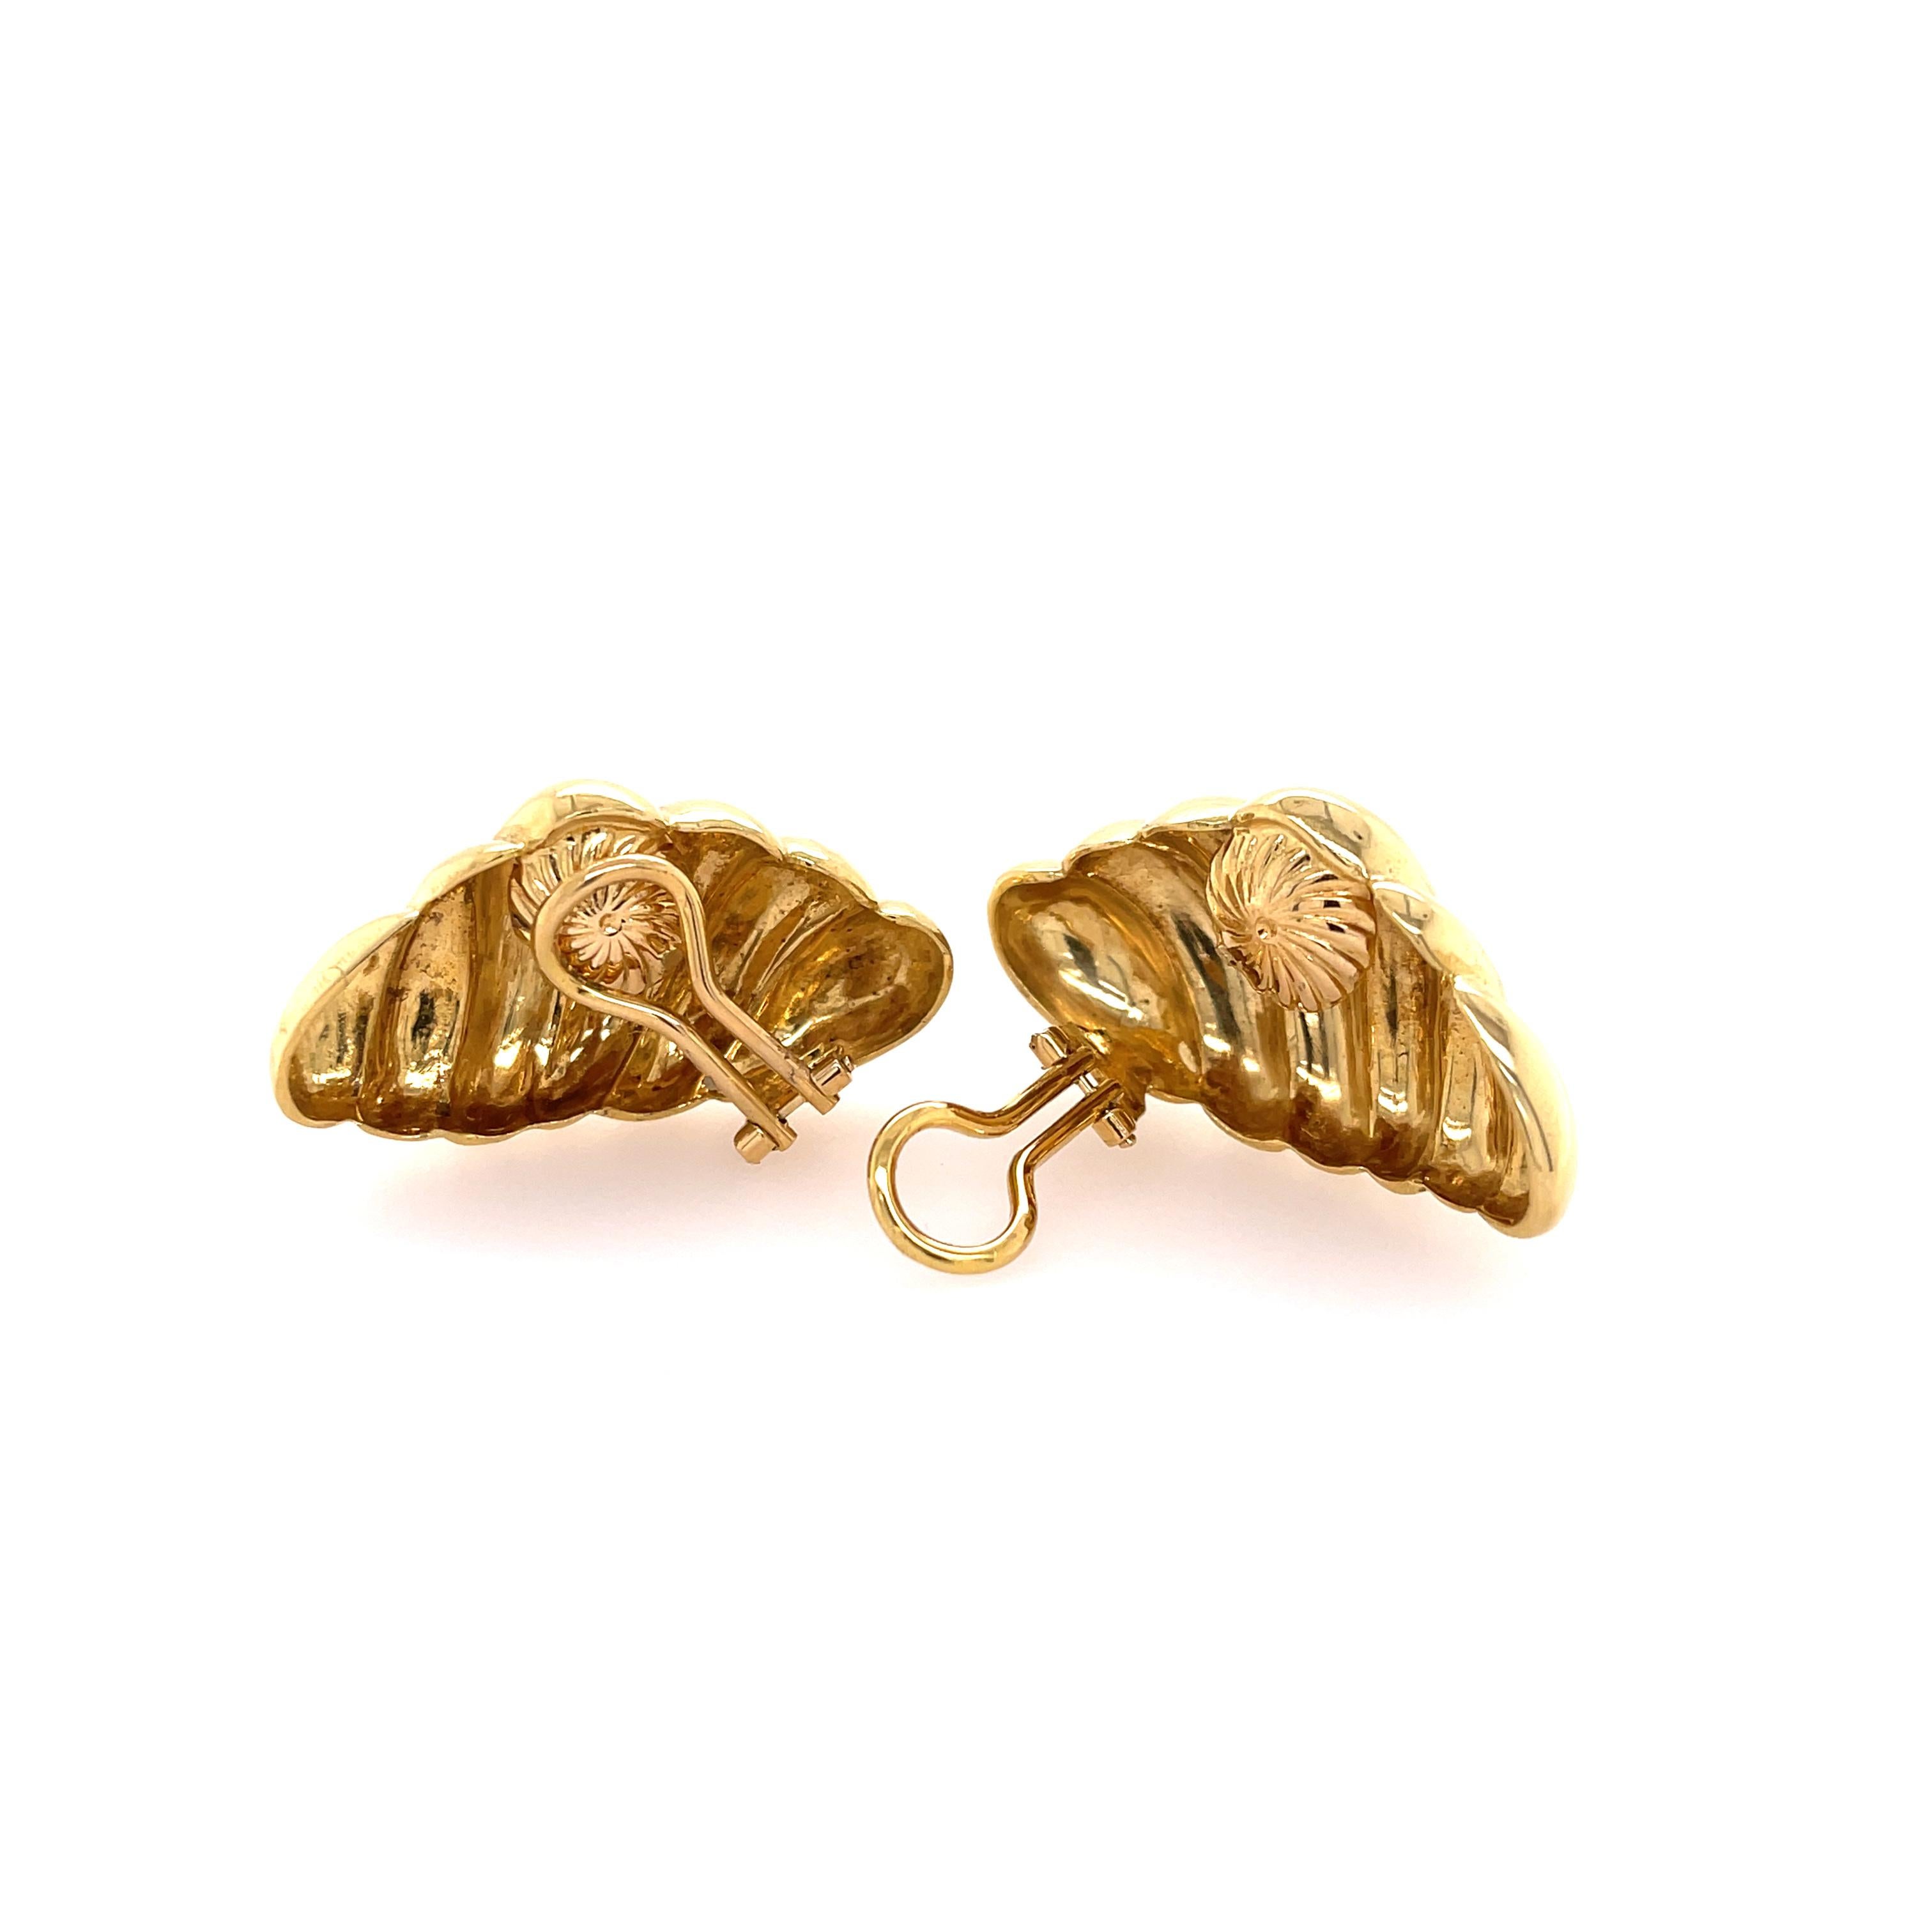 Ribbed clip-on earrings in 18K yellow gold. Marked 750, 1183 AL. 